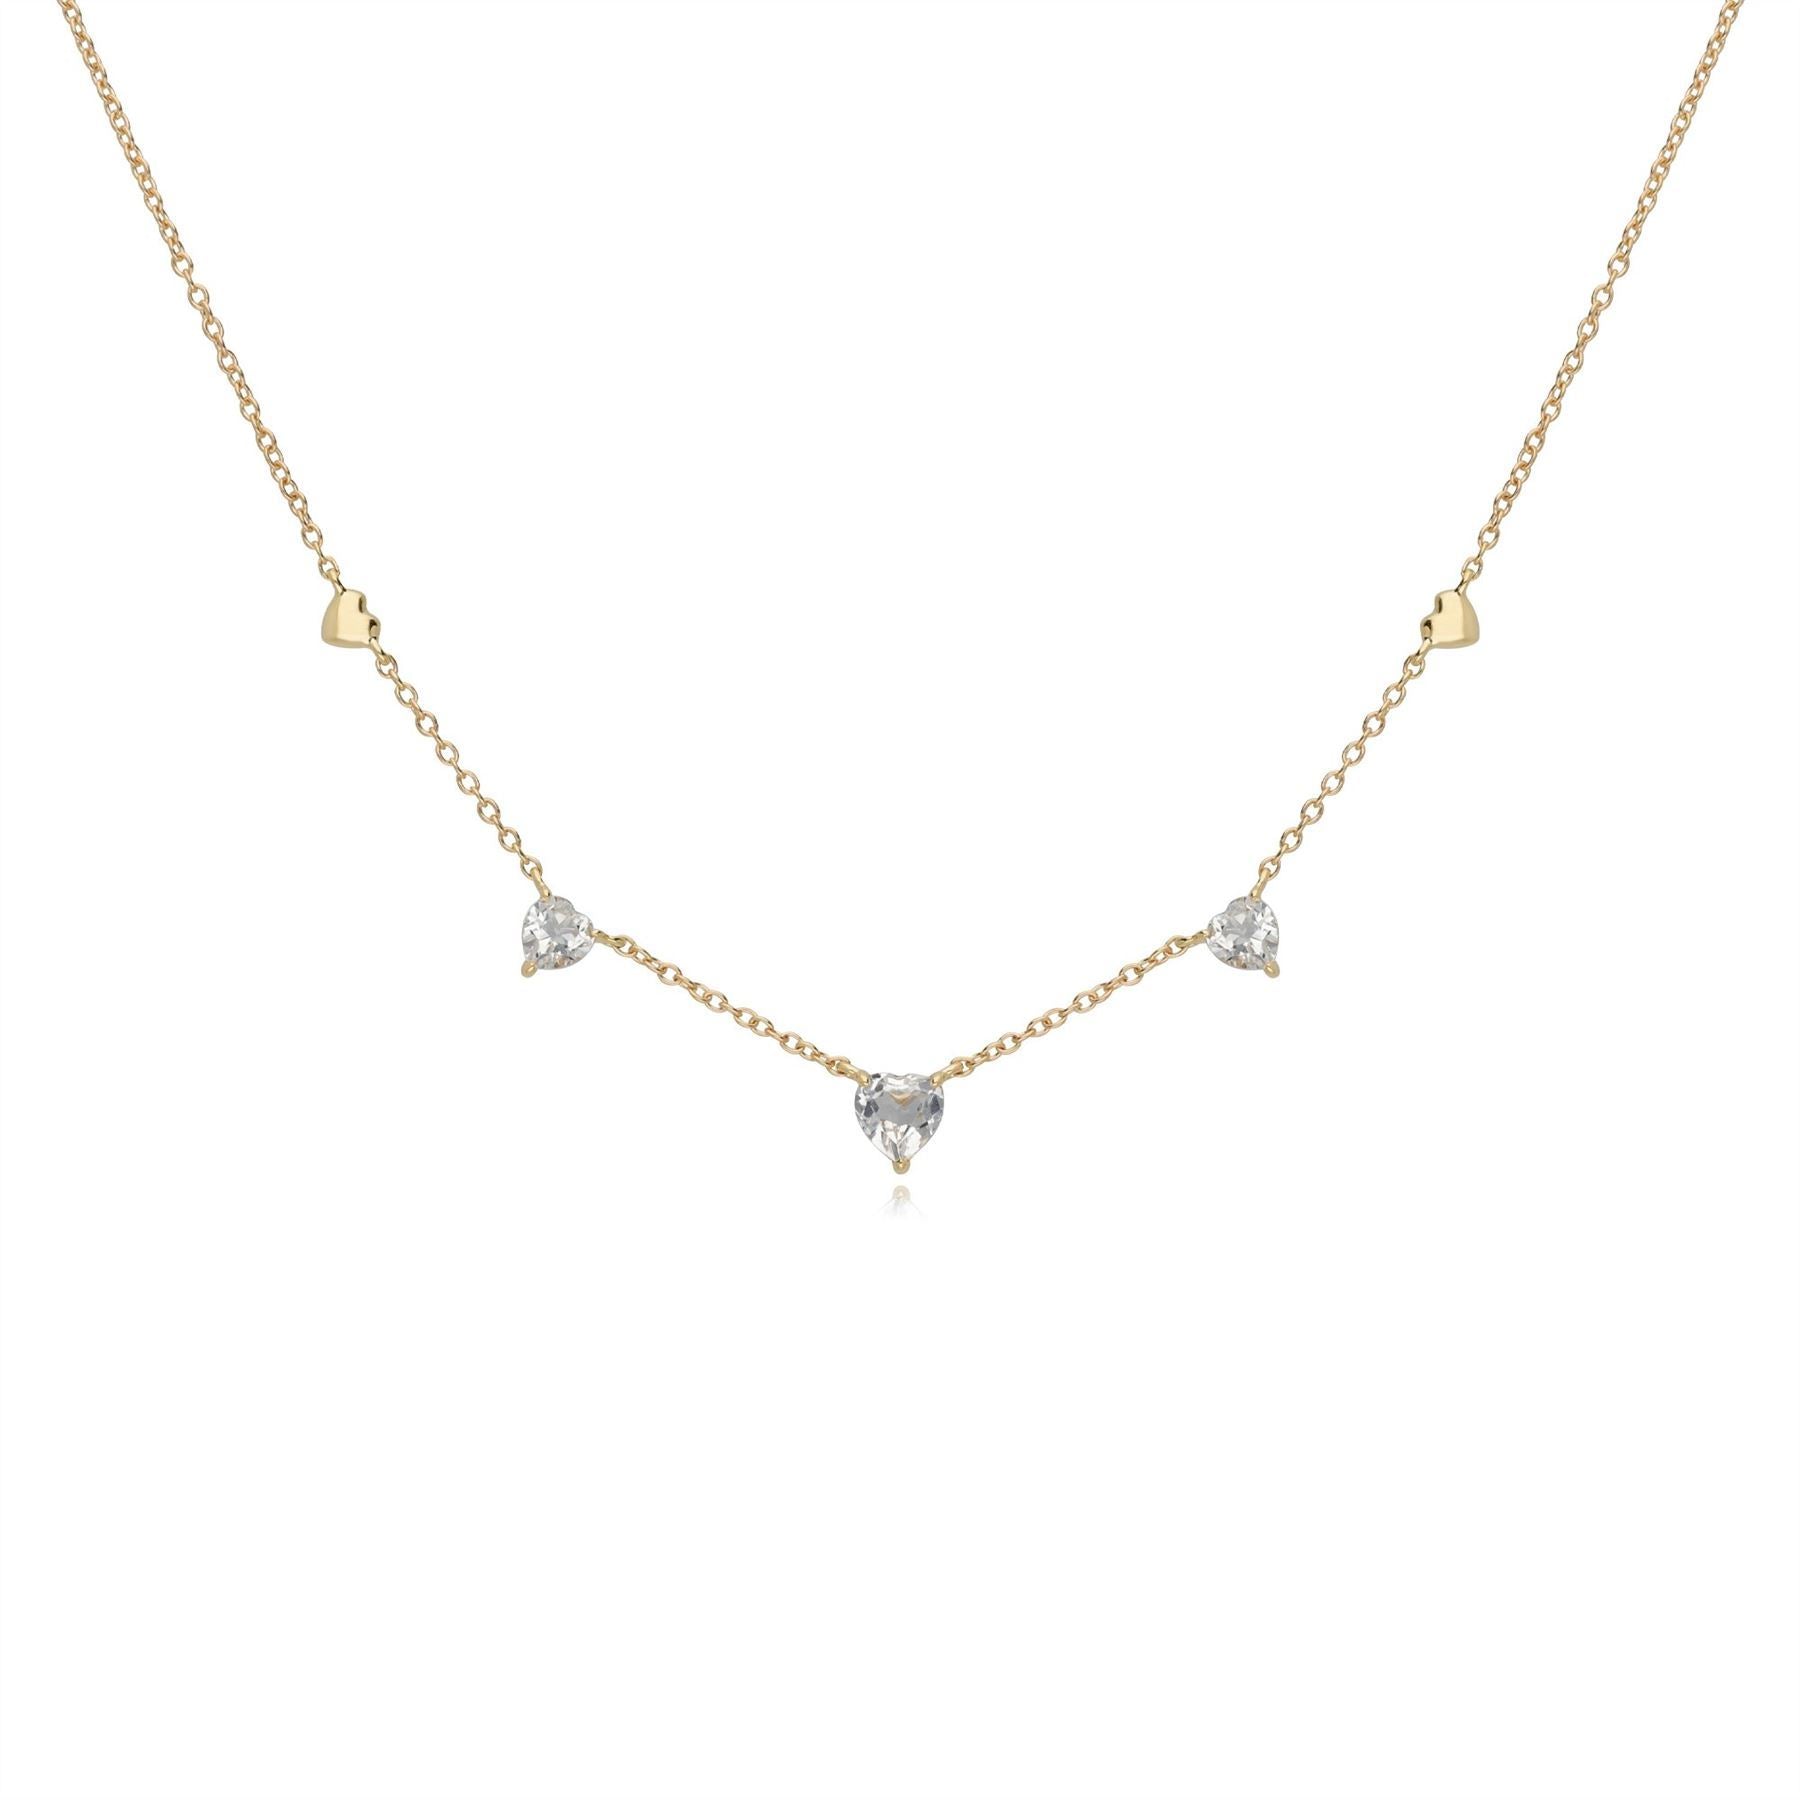 White Topaz Love Heart Necklace in 9ct Yellow Gold